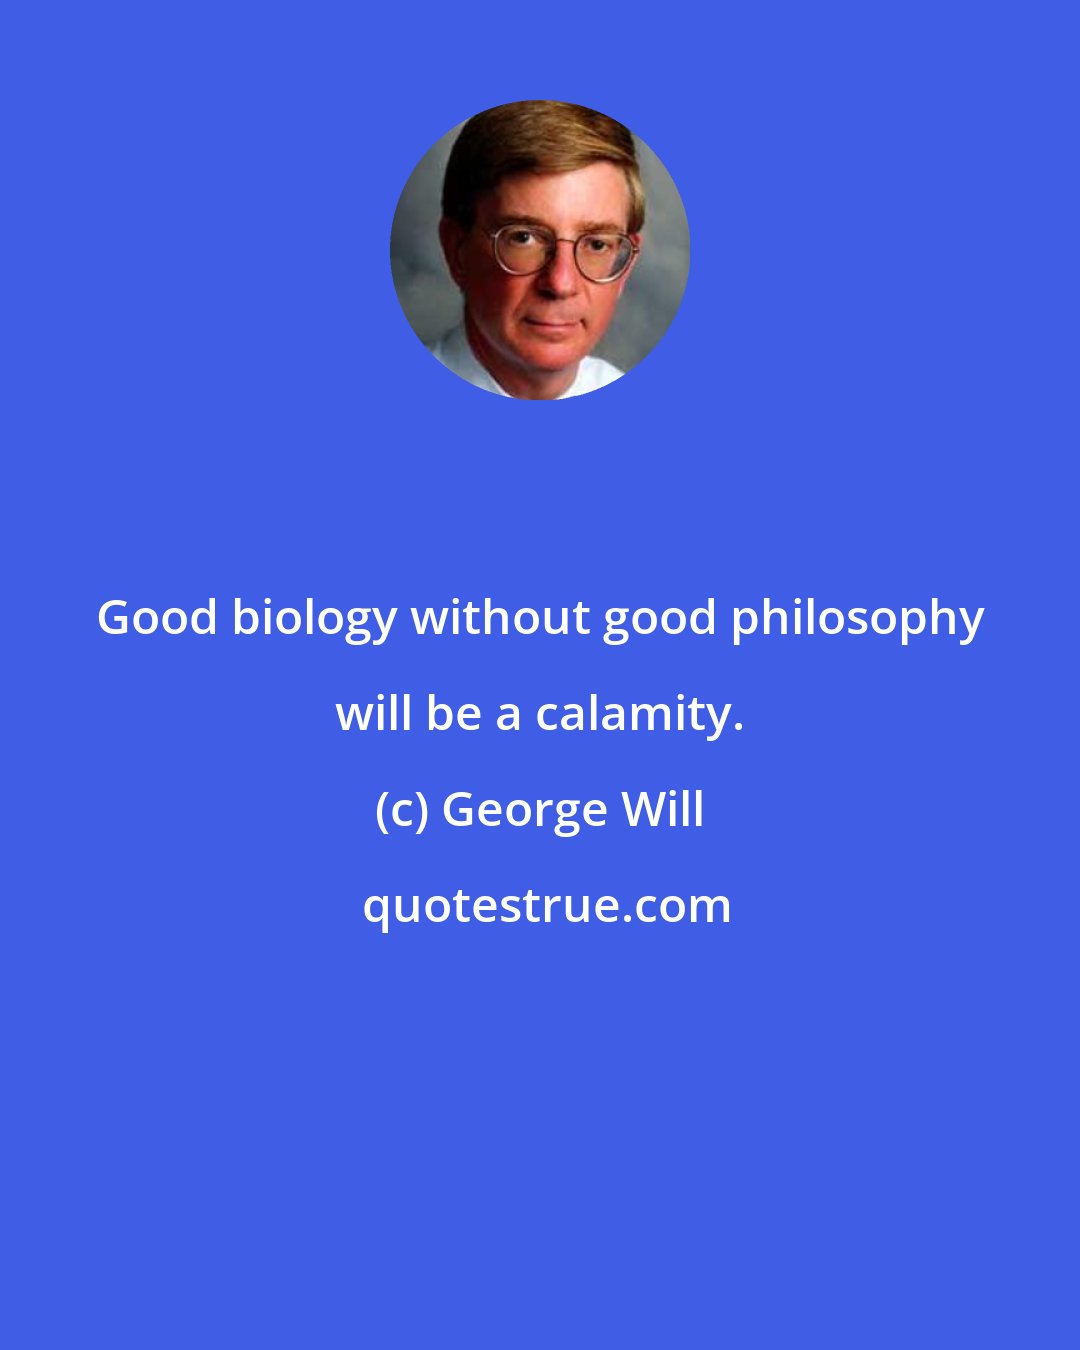 George Will: Good biology without good philosophy will be a calamity.